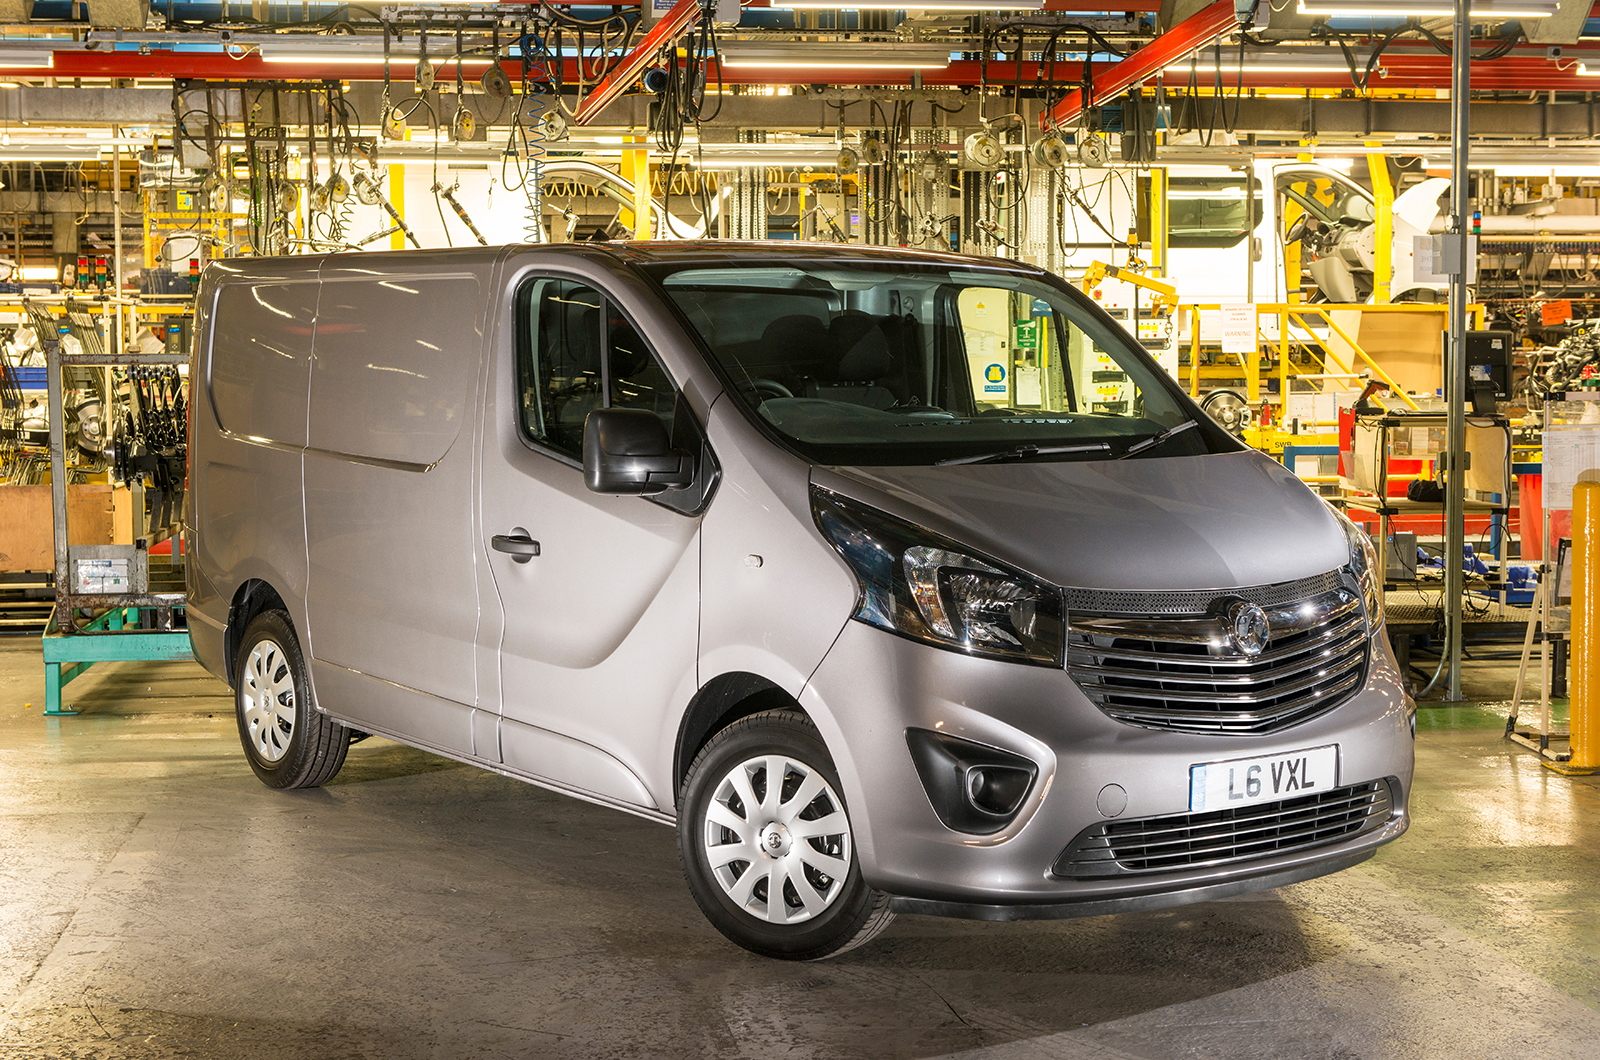 New Vauxhall Vivaro And Renault Trafic Vans To Launch This Summer Autocar